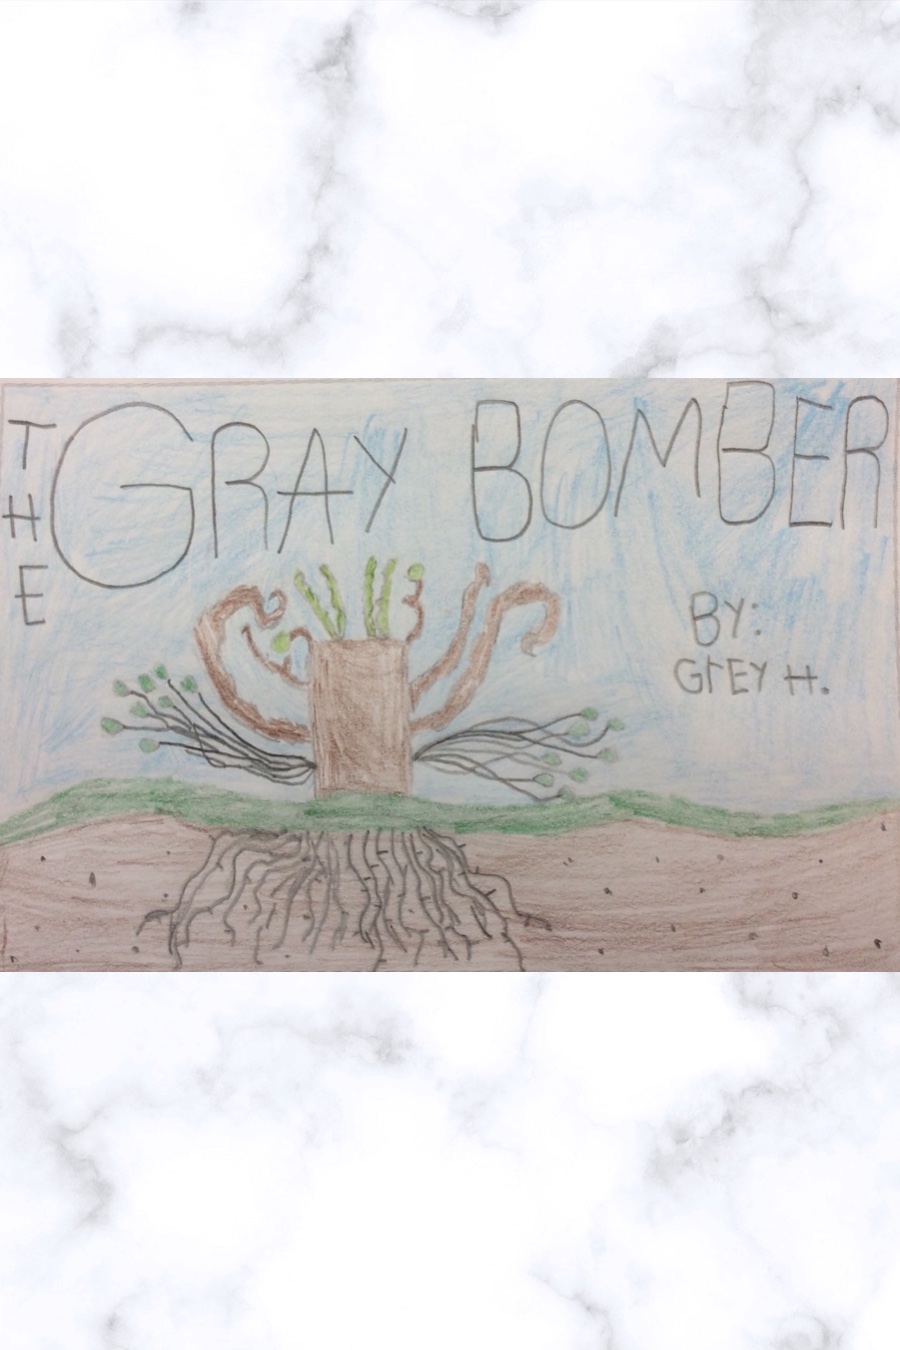 The Gray Bomber by Greyson Grey H